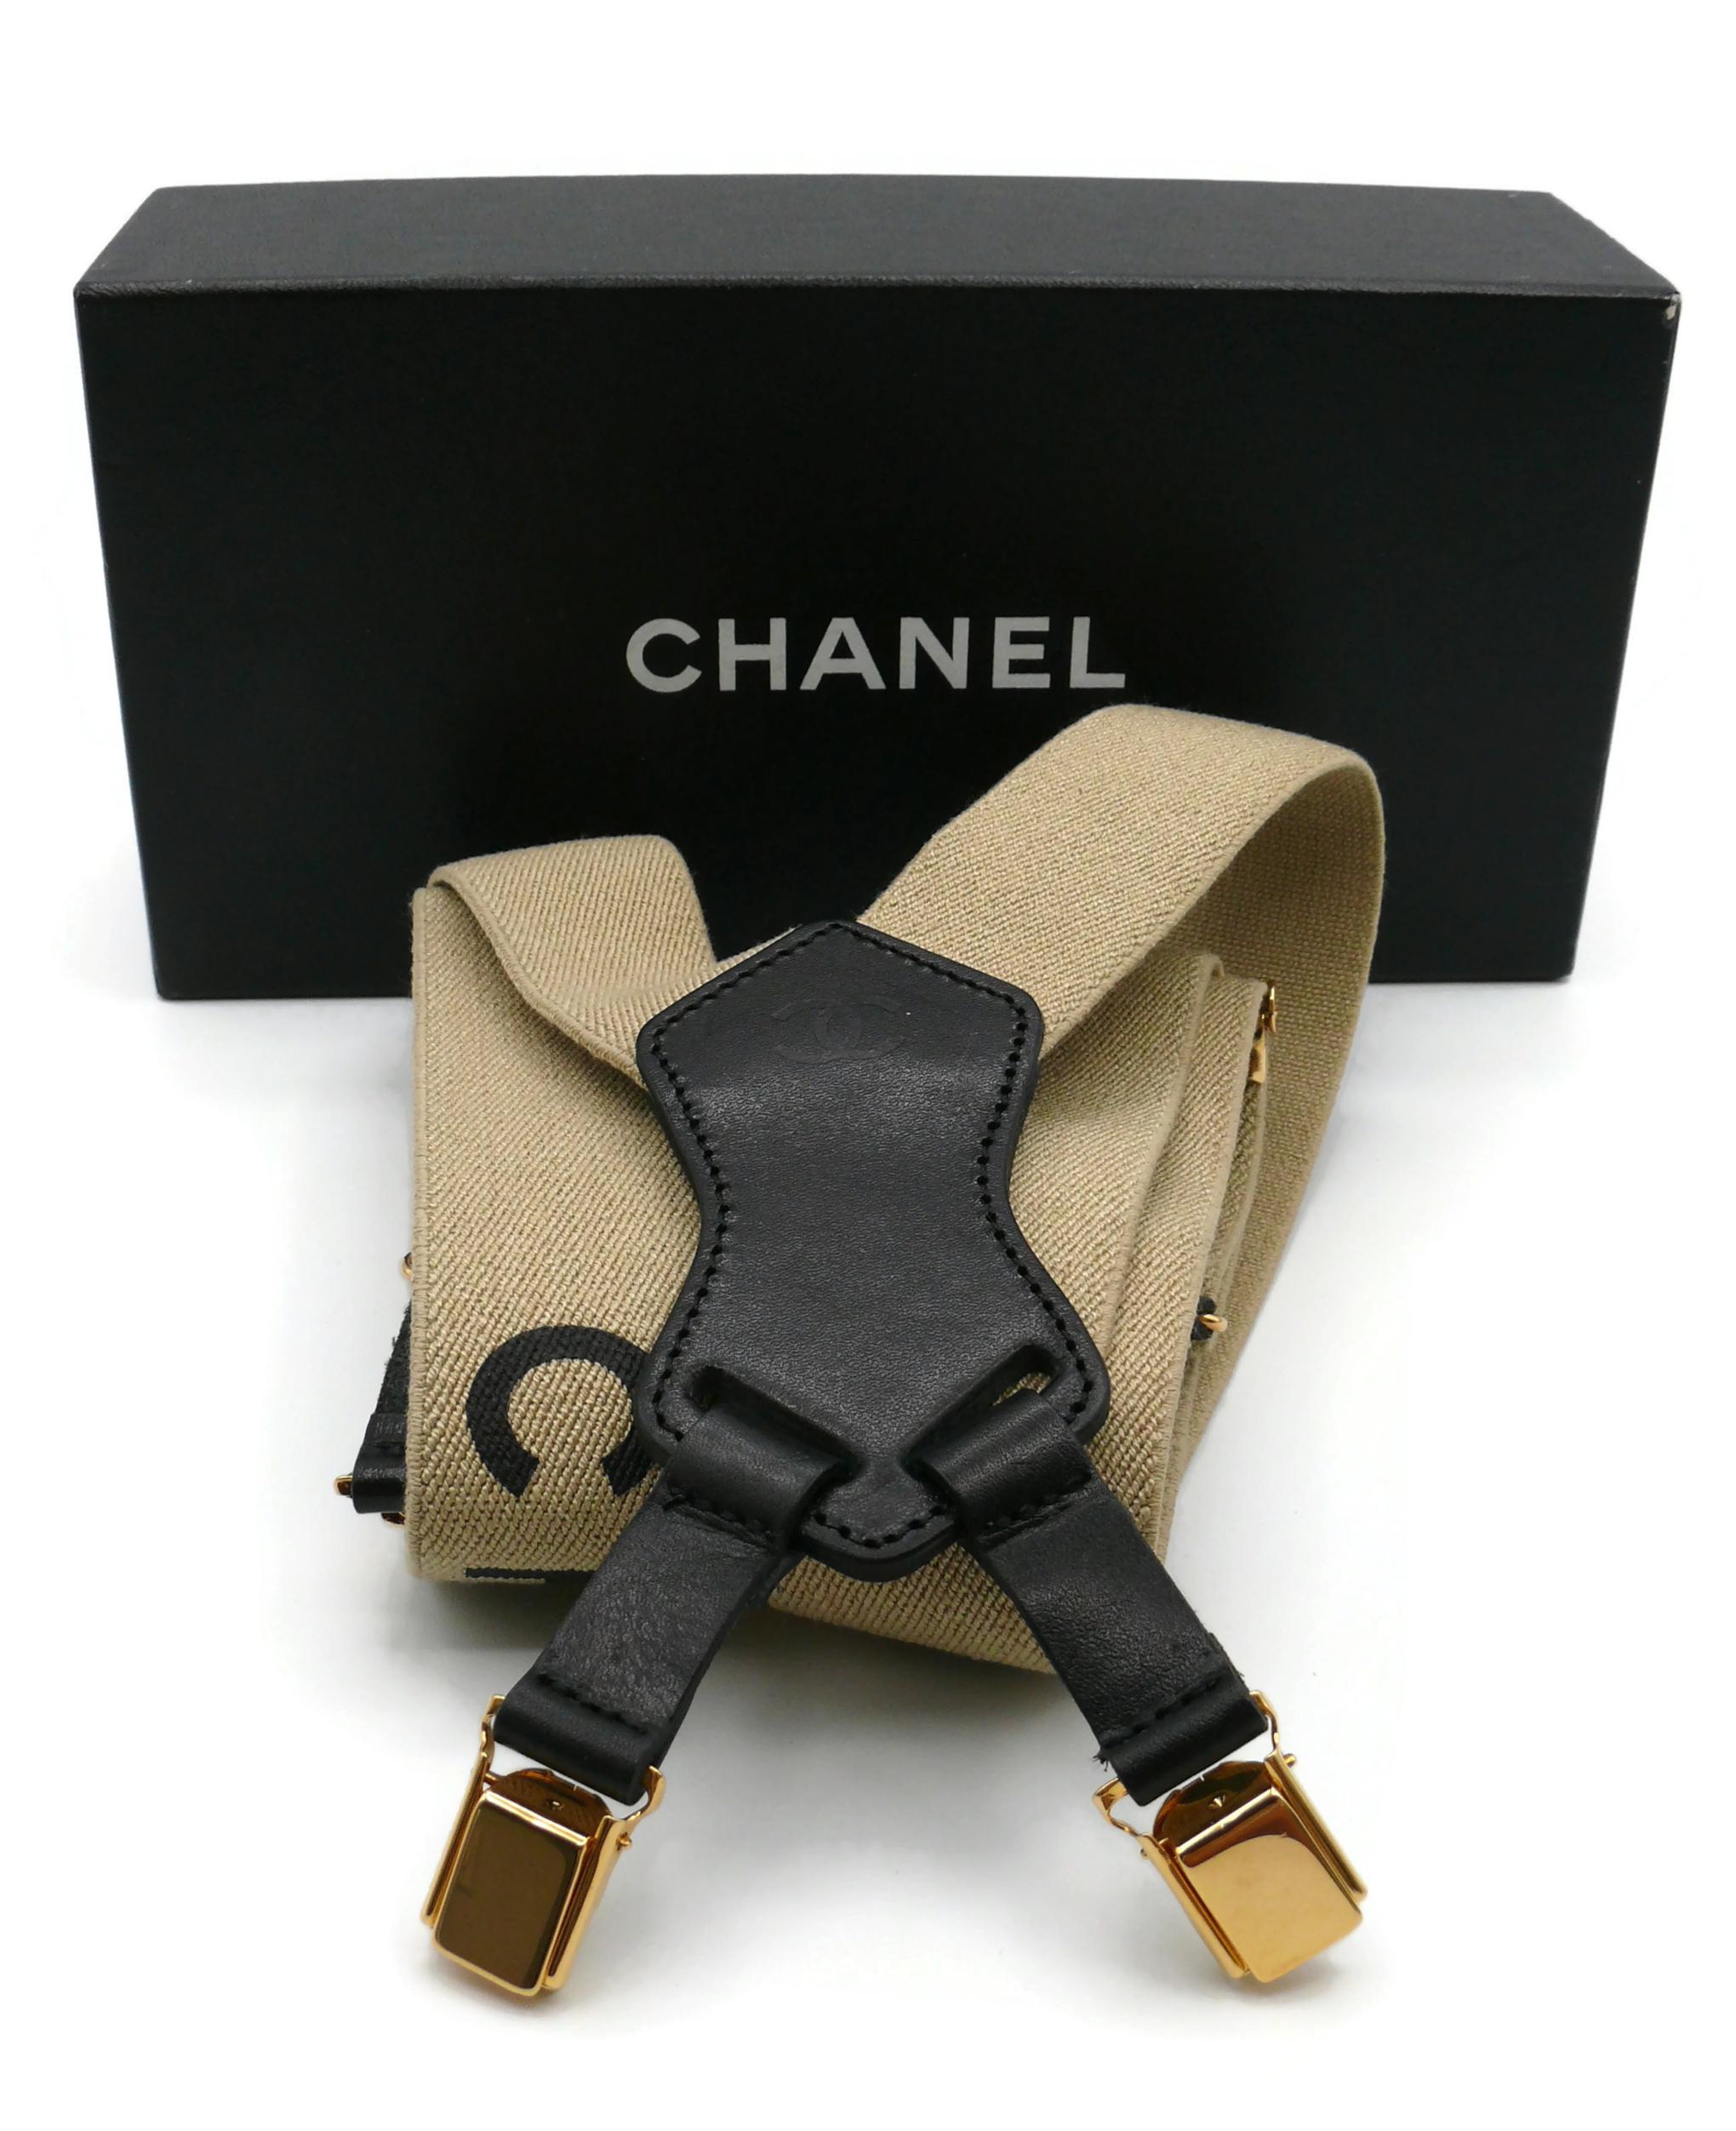 CHANEL by KARL LAGERFELD vintage Spring/Summer 1994 iconic rare suspenders in light brown version with black printed lettering, gold toned hardware and leather trim.

One size fits all (adjustable length).

CC logo embossed on the leather.

Label